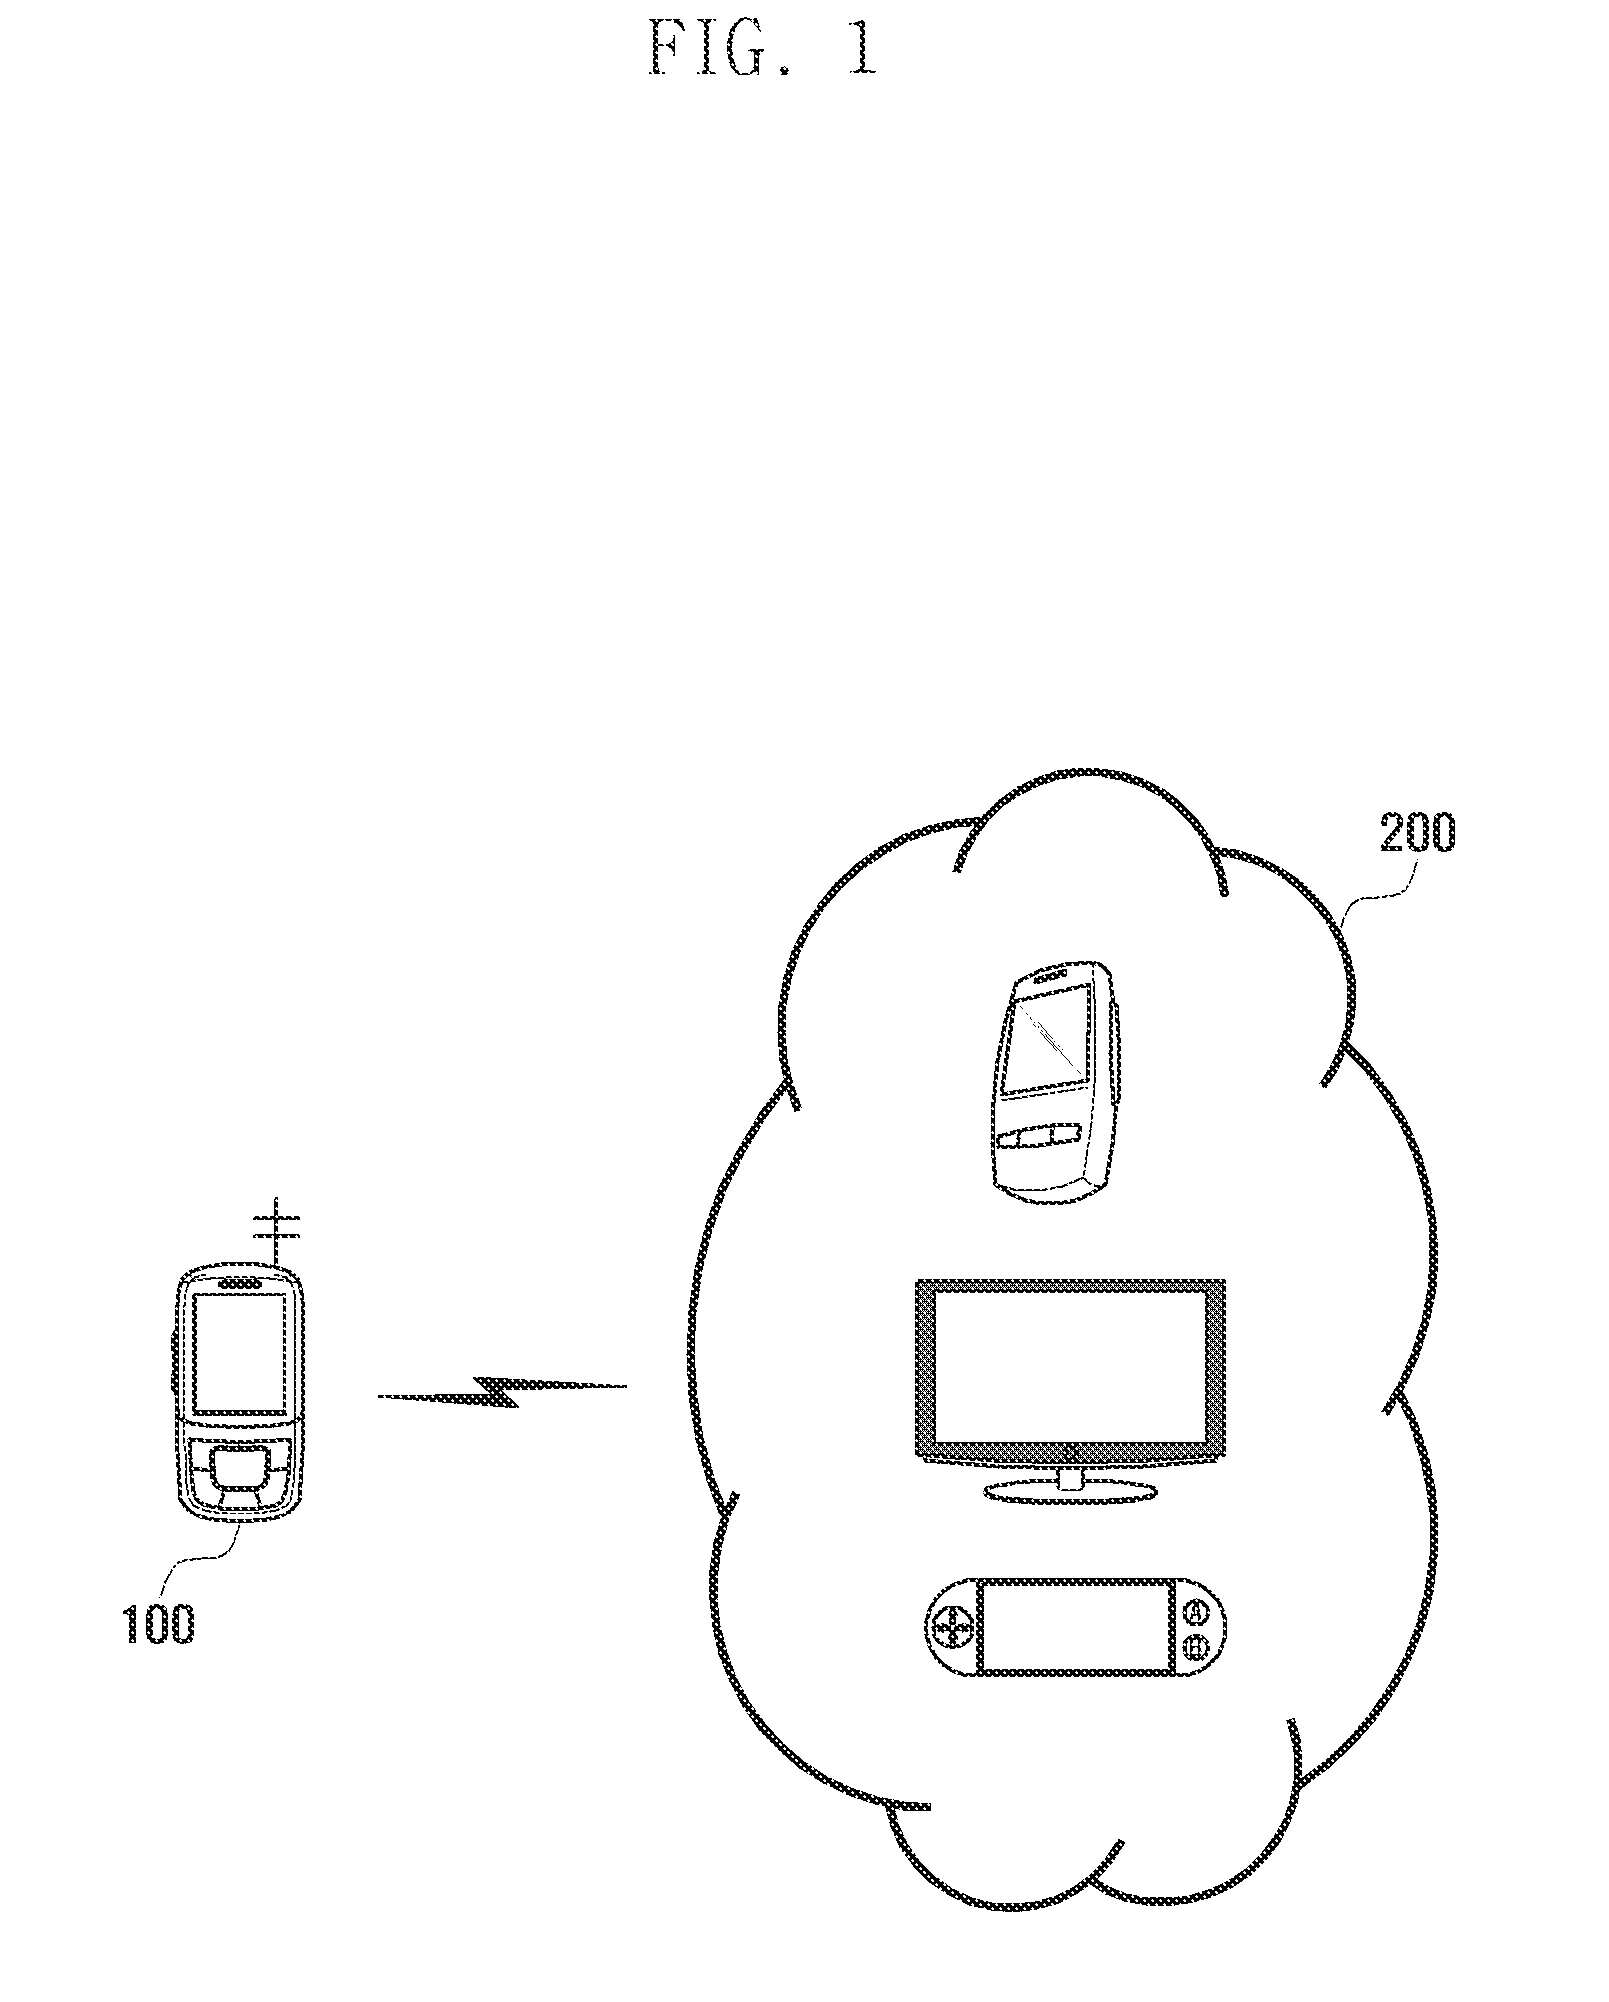 Wi-fi service method and system for wi-fi devices